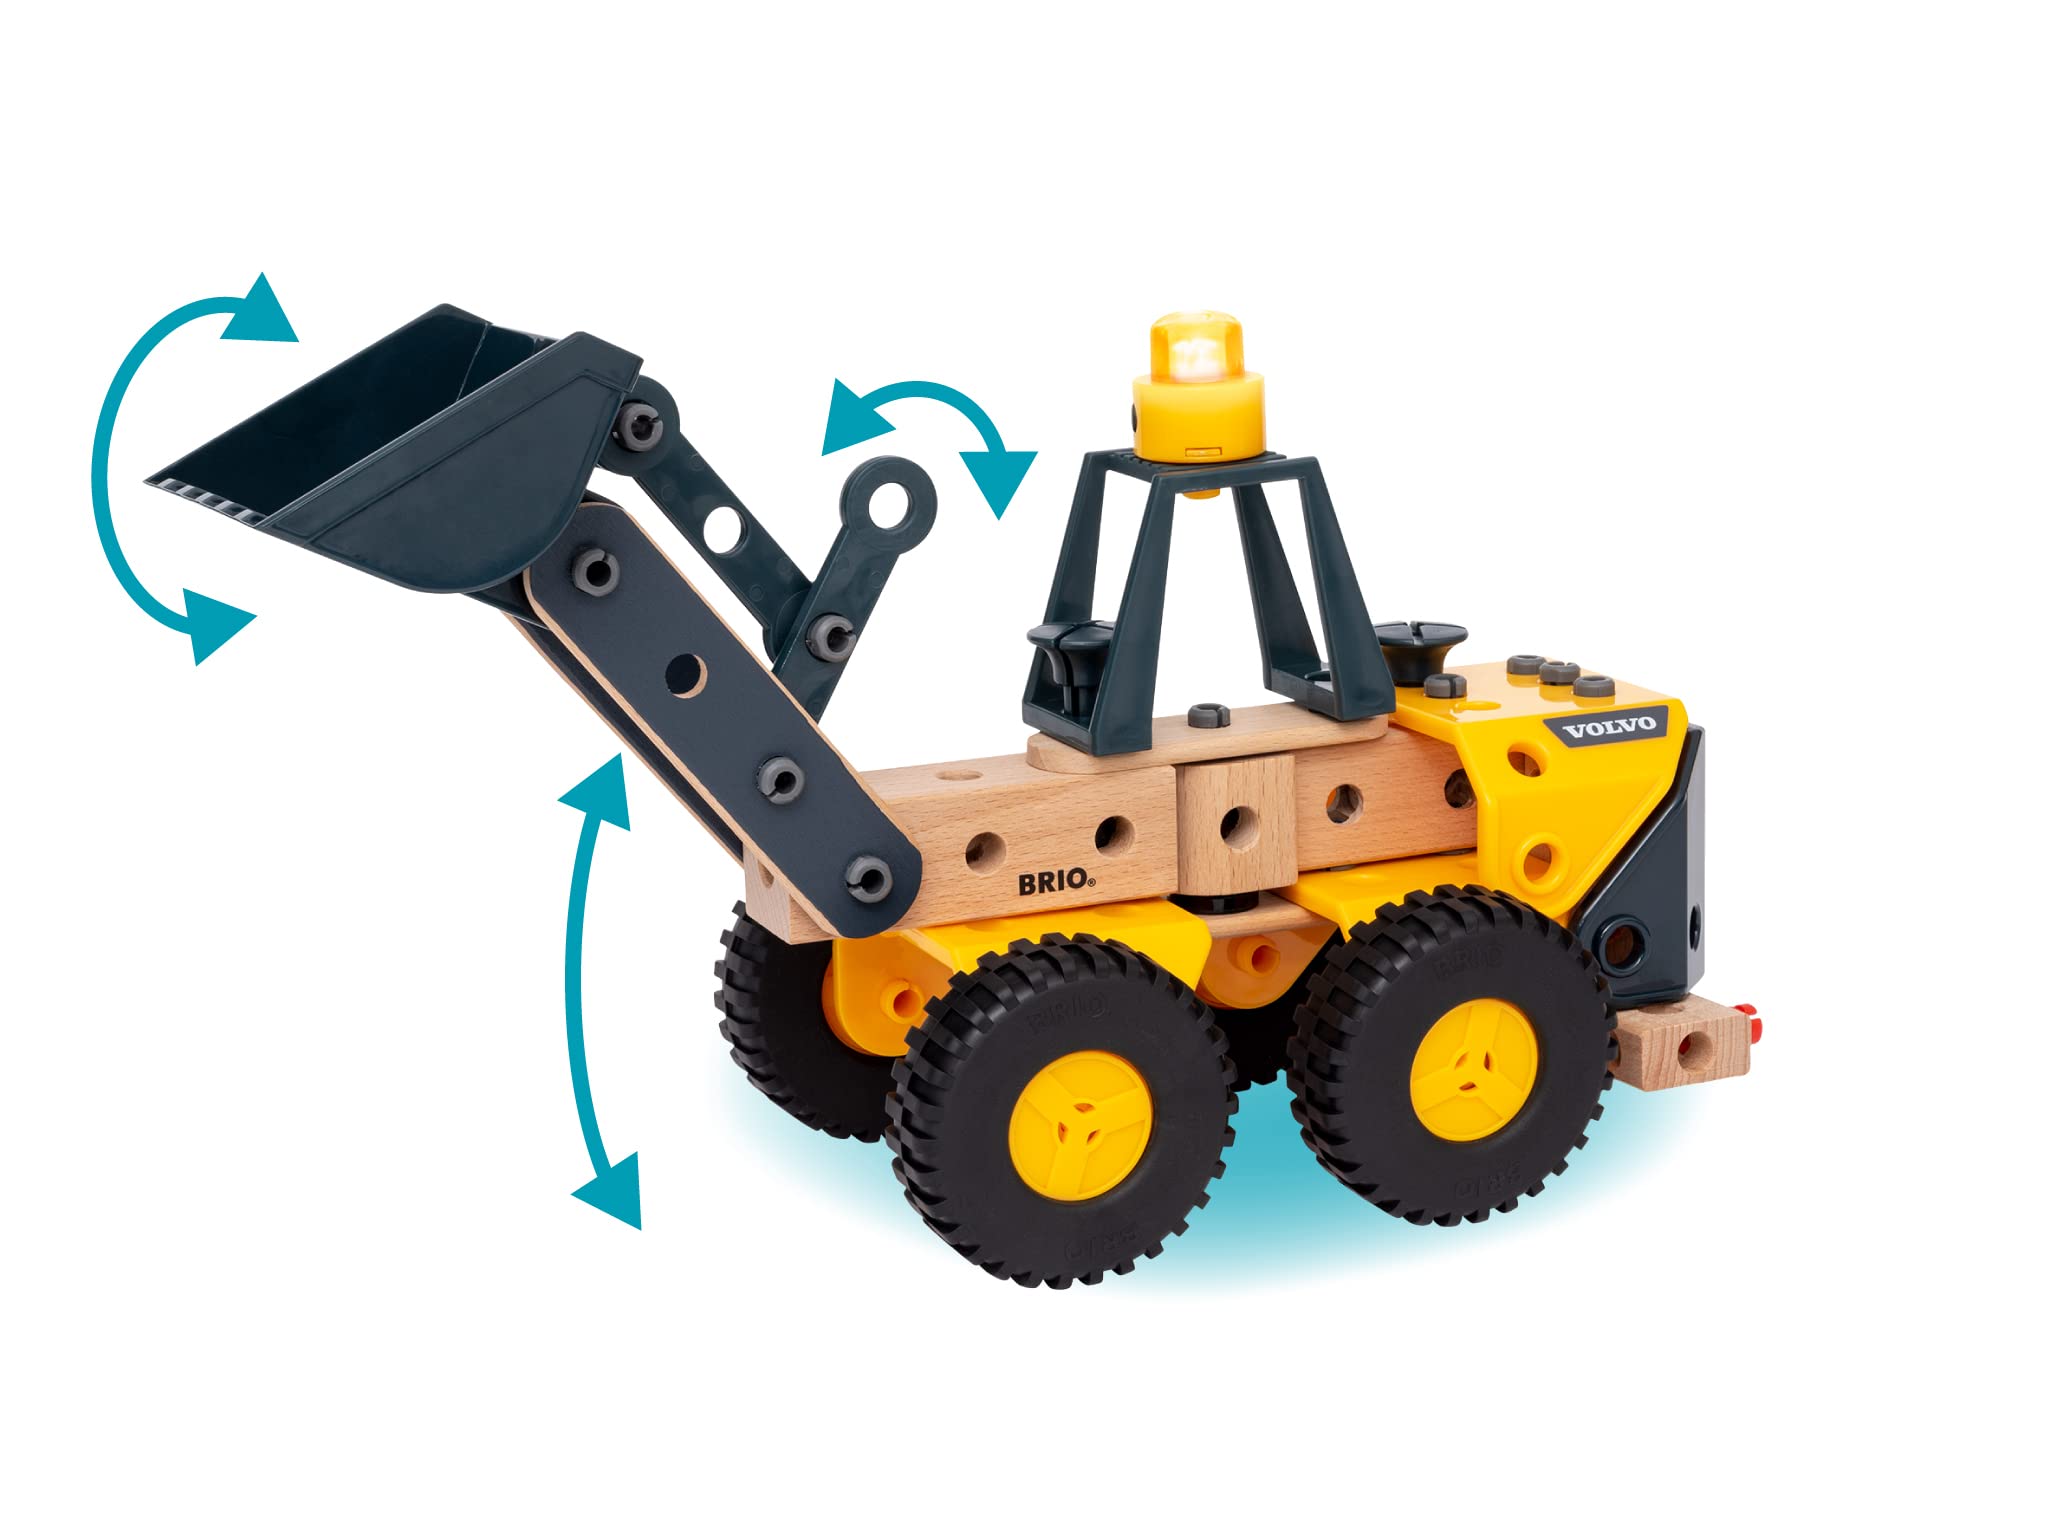 BRIO Builder - 34598 Volvo Wheel Loader | Educational Construction Toy for Kids Age 3 Years Up